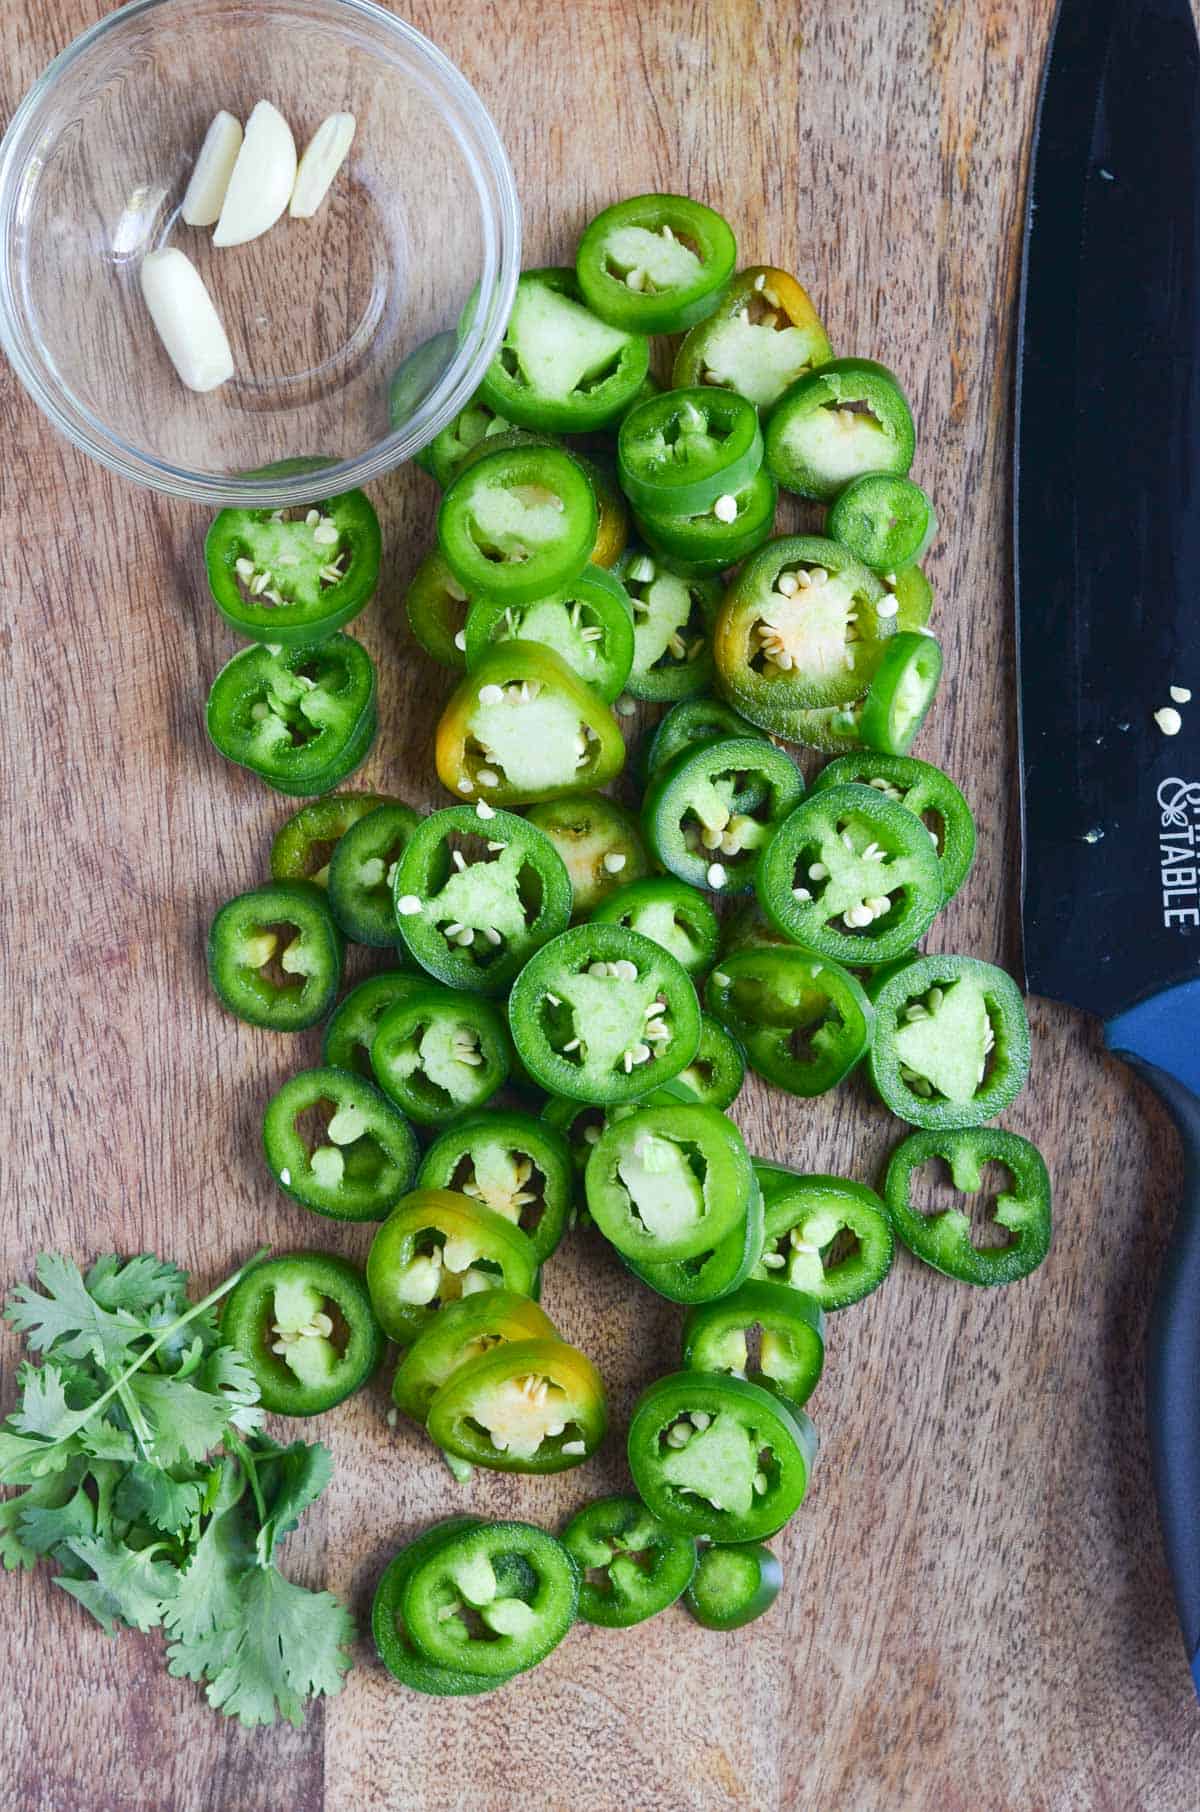 Thin jalapeno rings are cut, and sliced garlic pods.